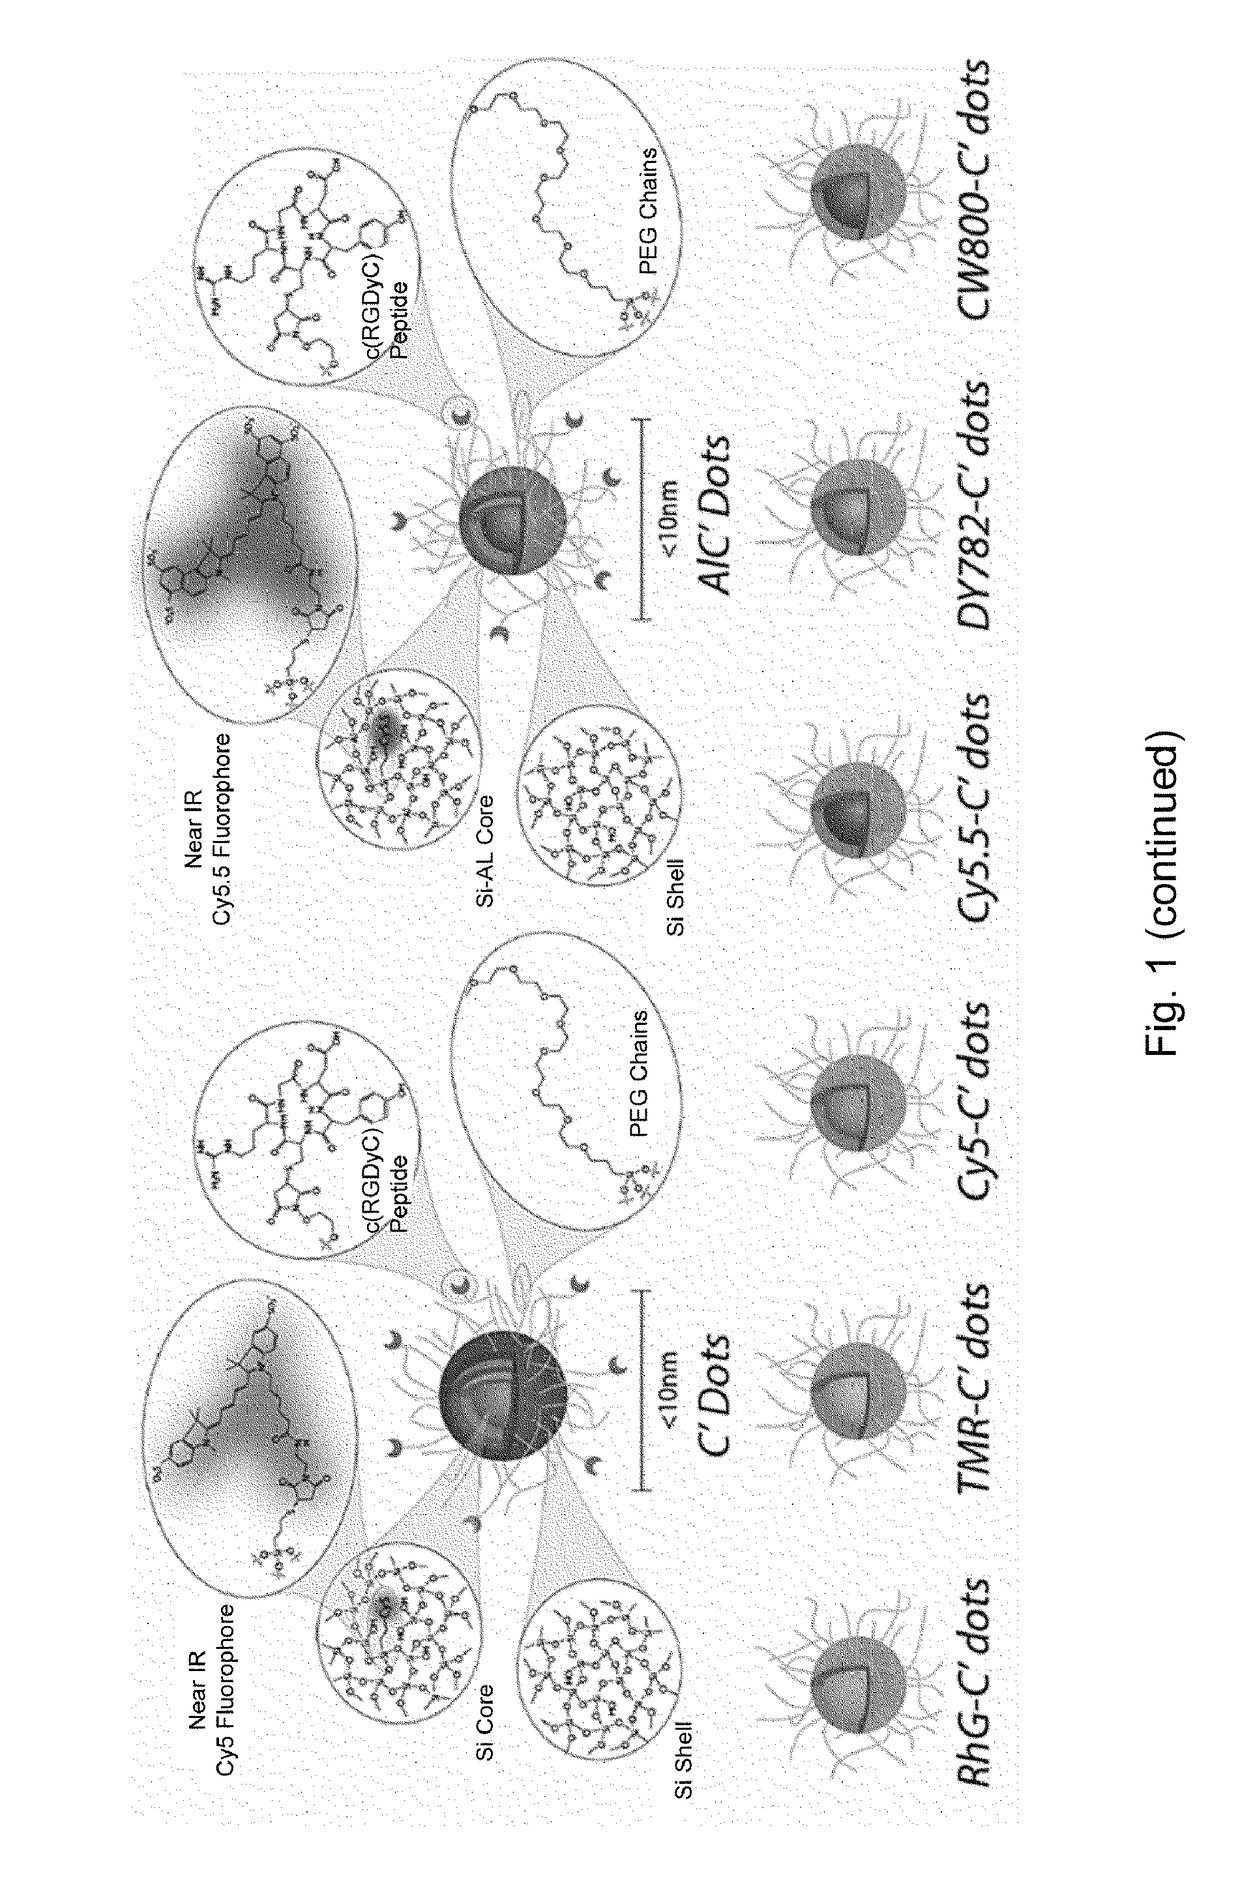 Ultrasmall nanoparticles and methods of making and using same